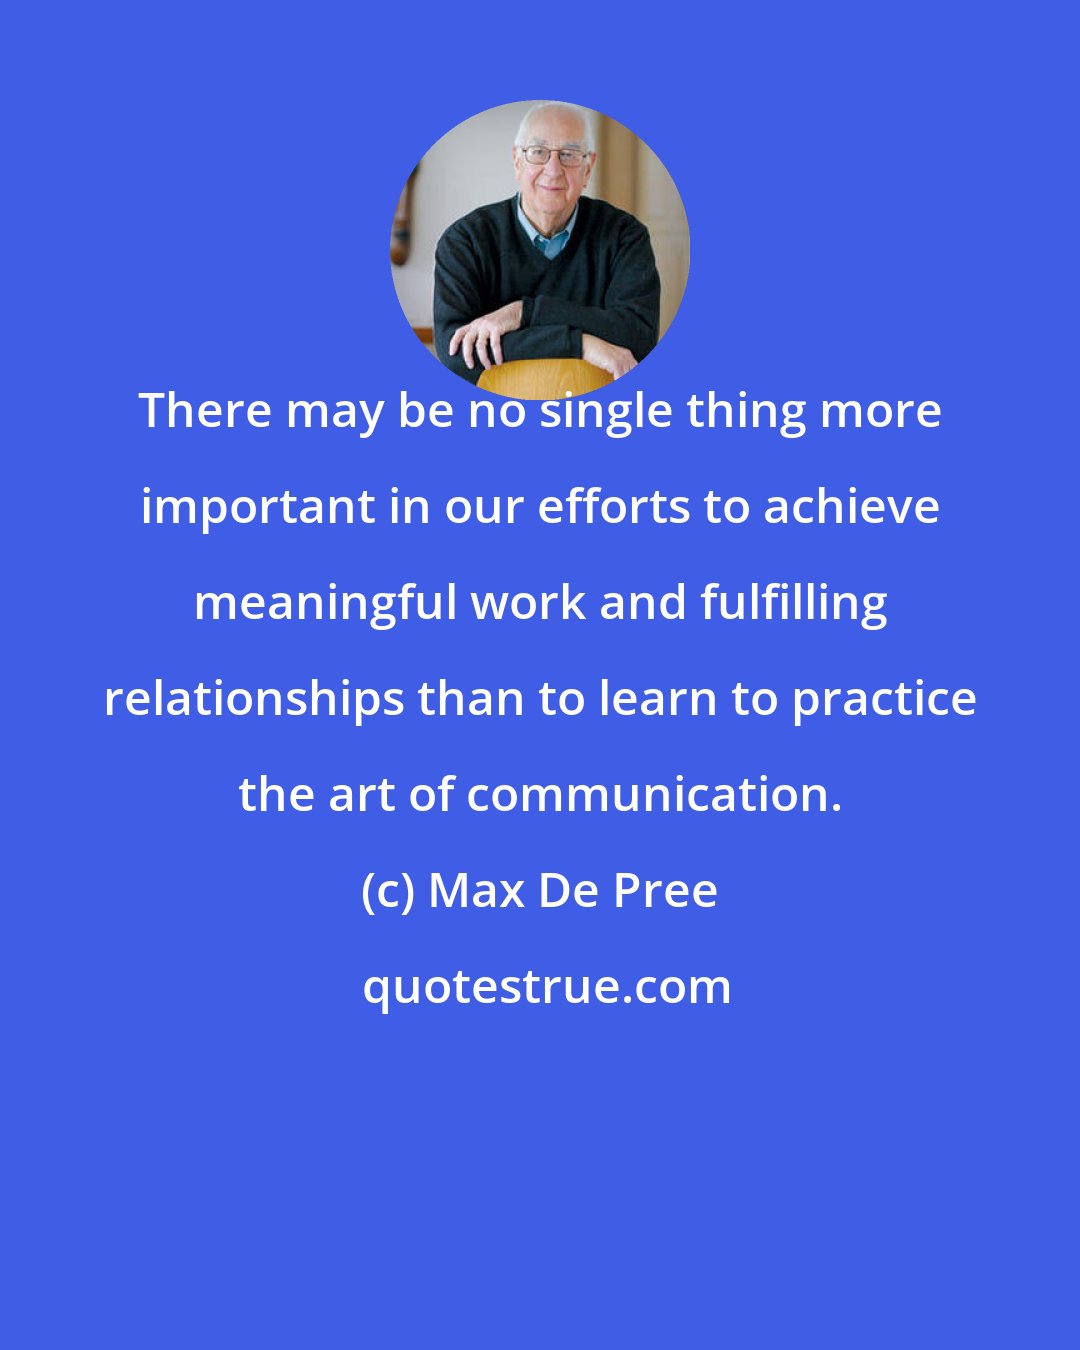 Max De Pree: There may be no single thing more important in our efforts to achieve meaningful work and fulfilling relationships than to learn to practice the art of communication.